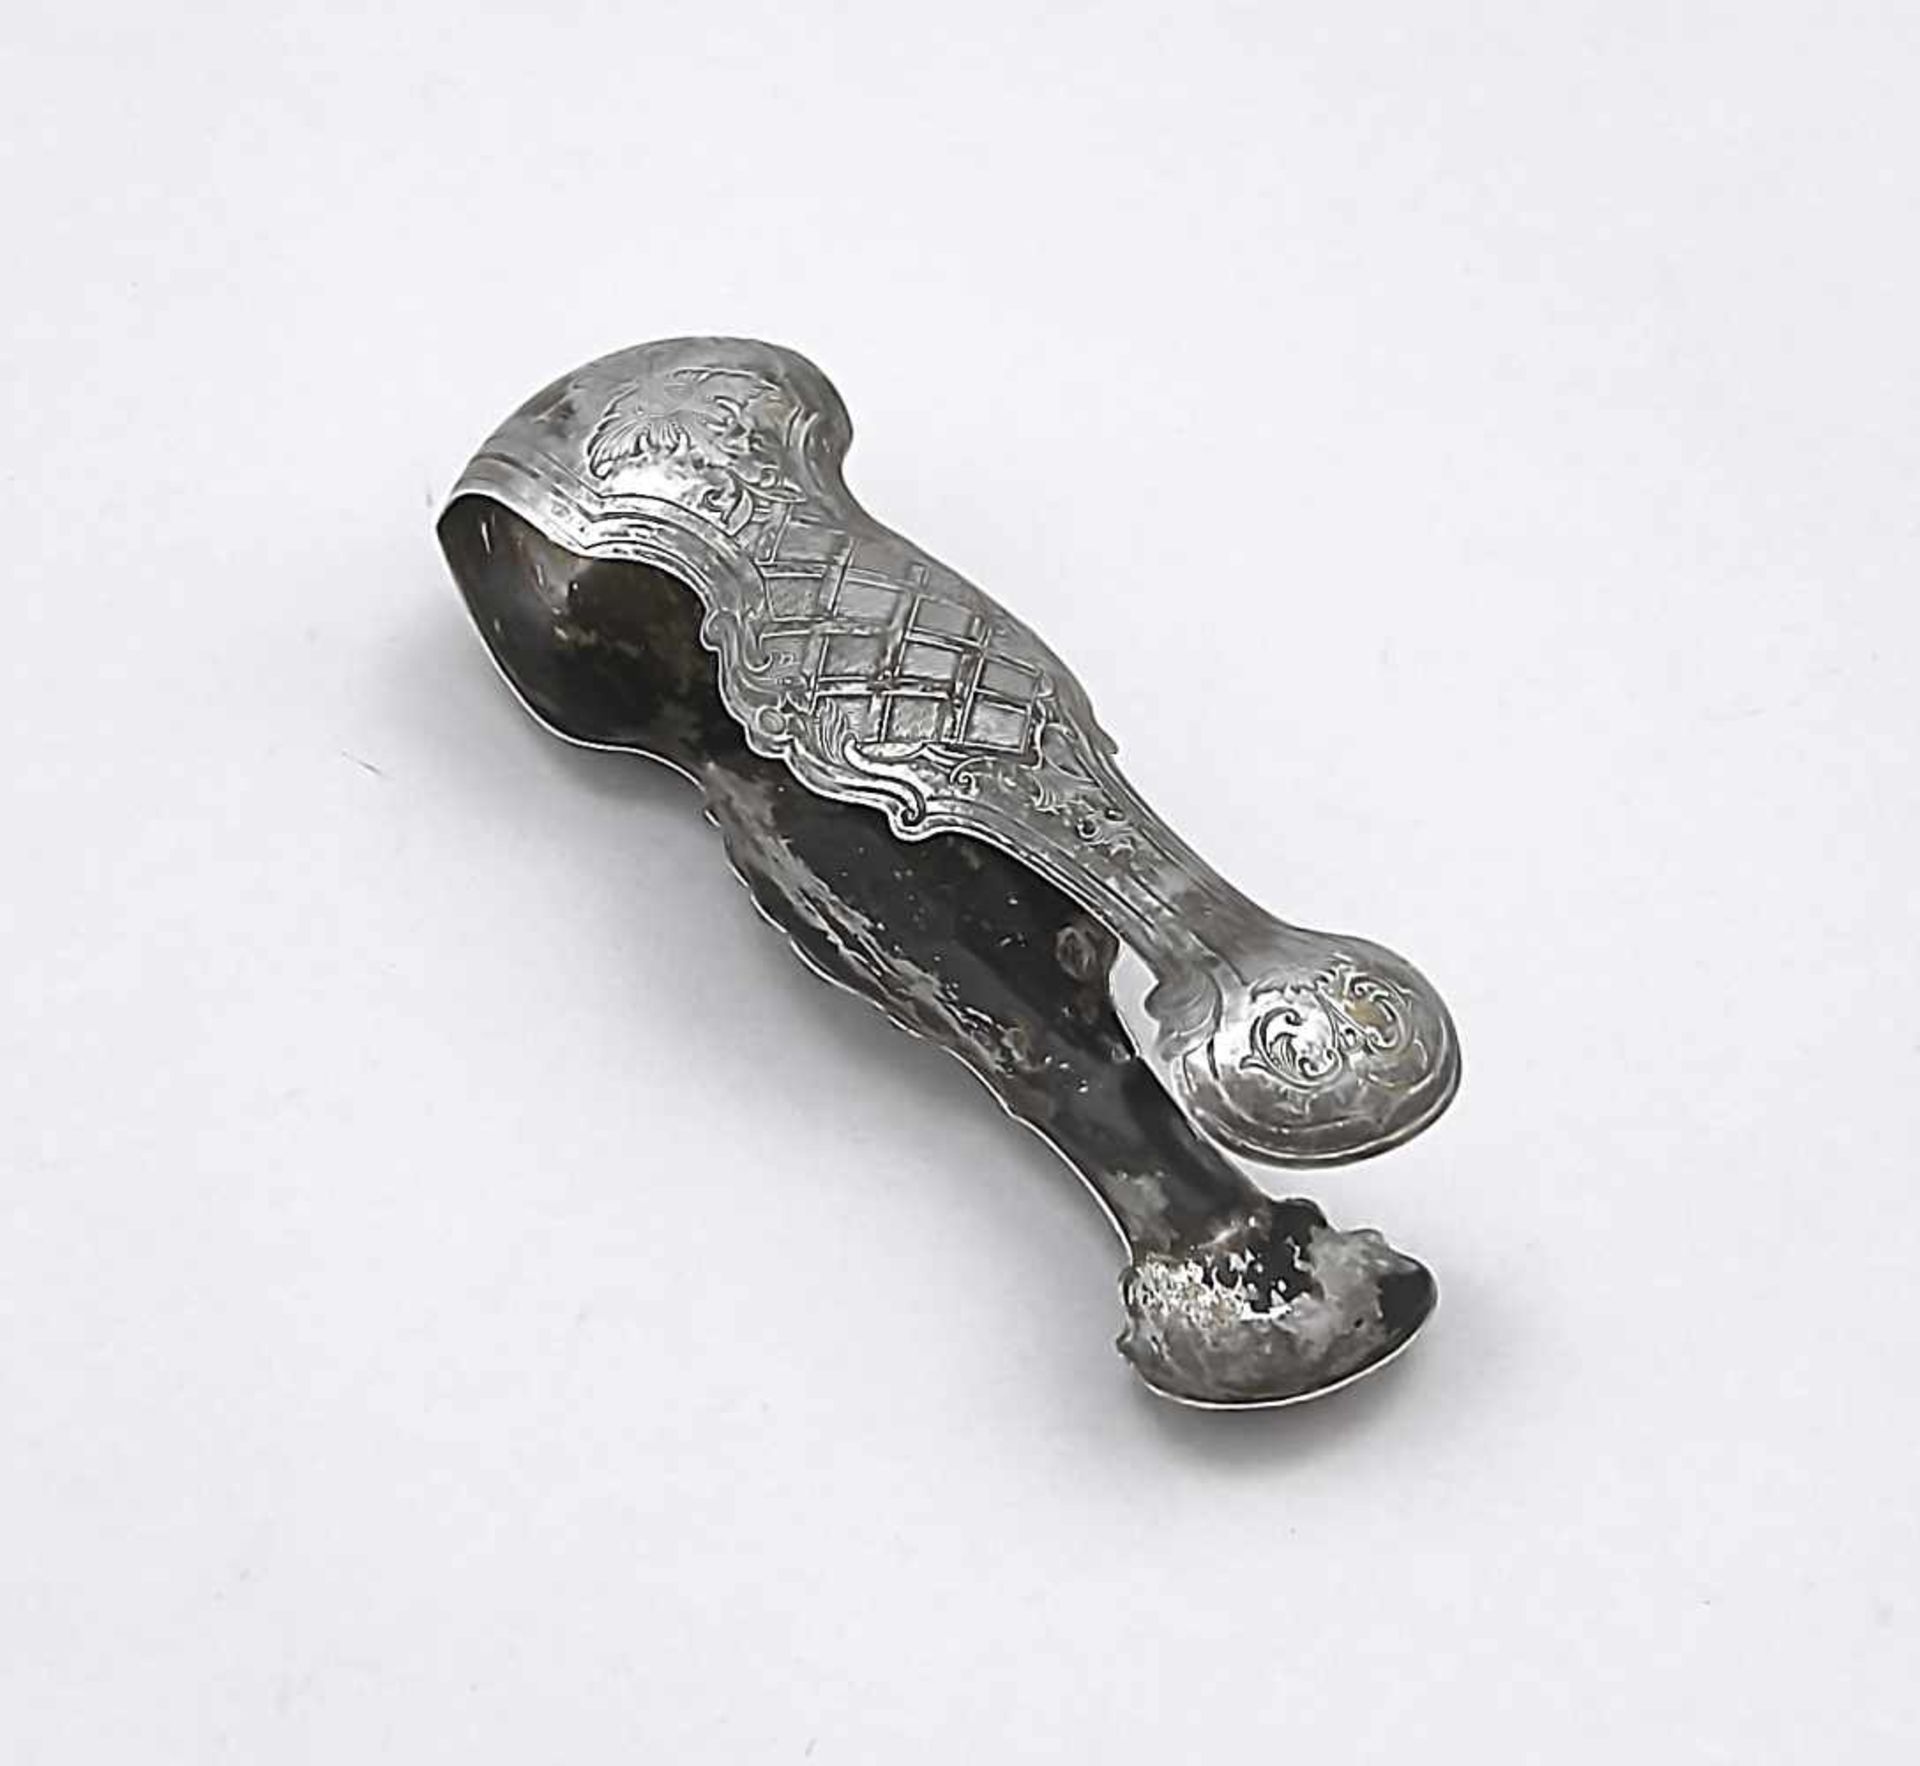 Sugar tongs, 19th century, silver 12 (750/000), with ornamental and floral engraving